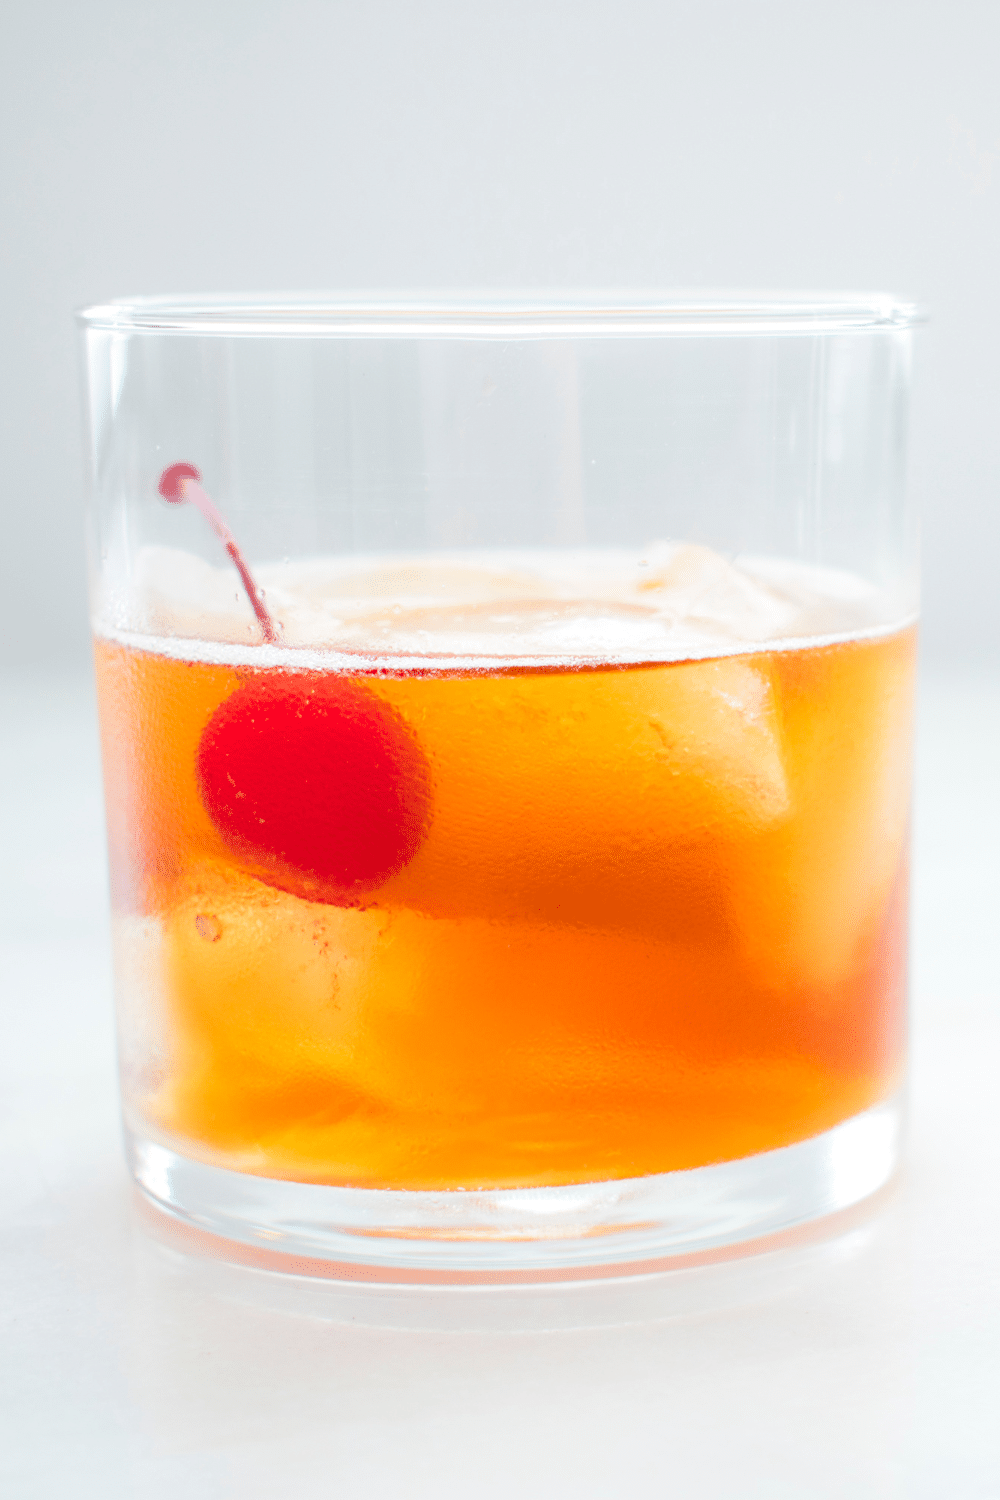 Classic Manhattan cocktail with a rich amber hue, blending rye whiskey, sweet vermouth, and a dash of aromatic bitters.